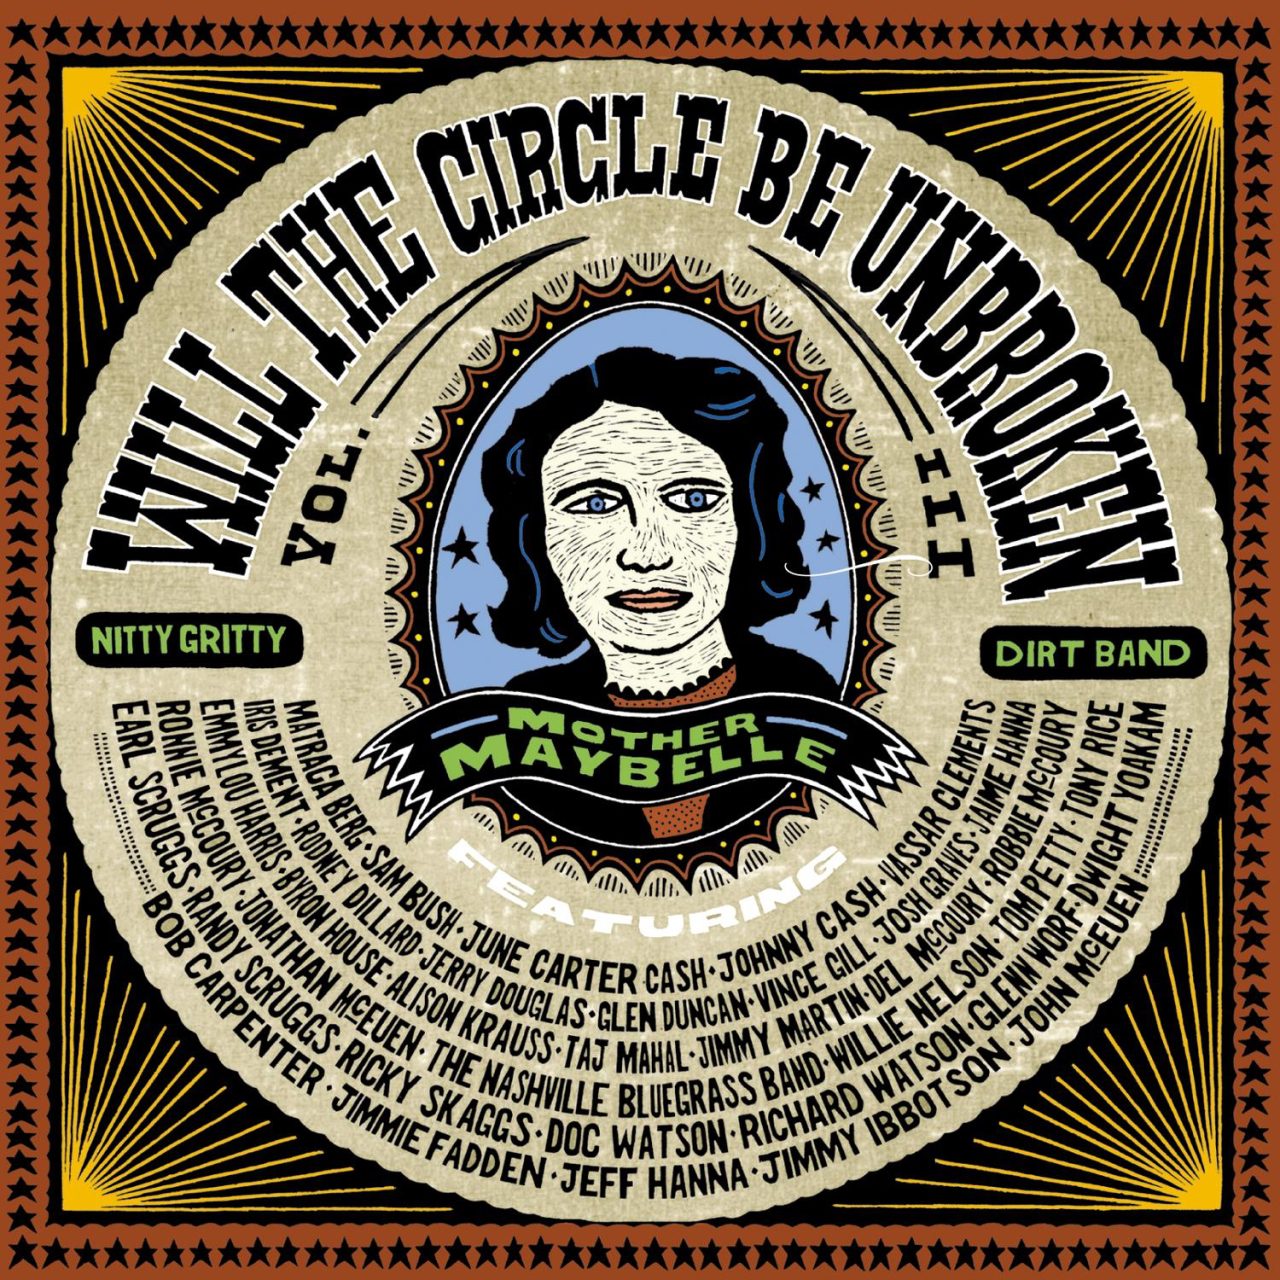 Nitty Gritty Dirt Band – Will The Circle Be Unbroken, Vol. 3 cover album